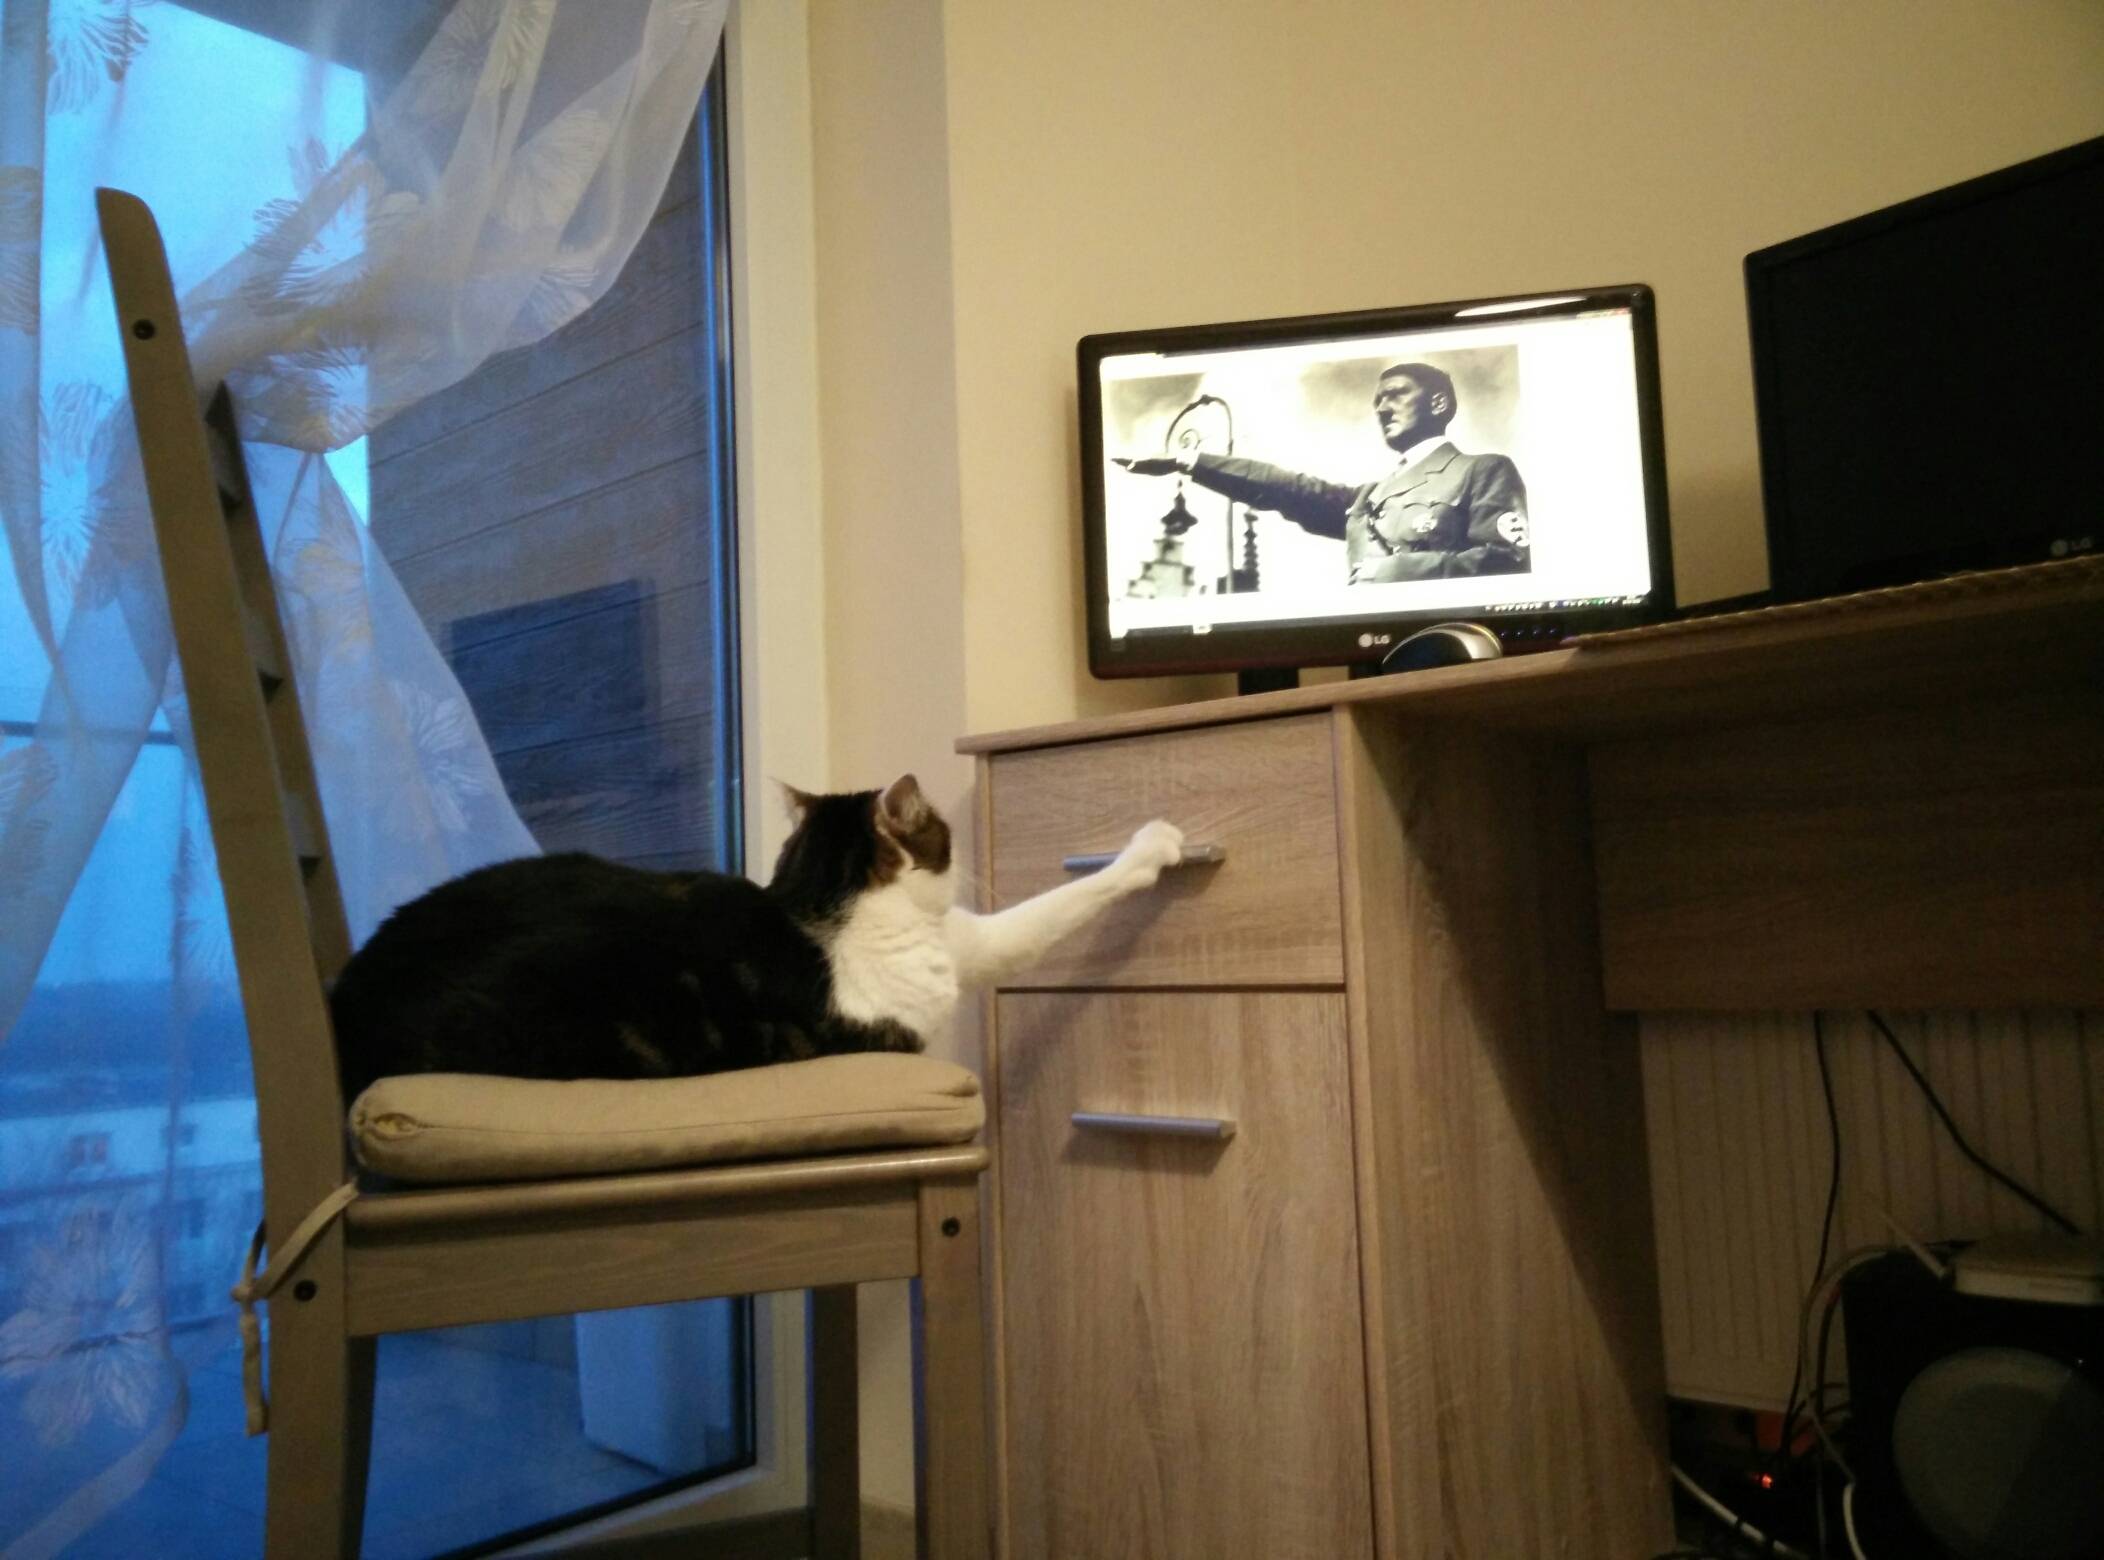 And that’s why you don’t leave your cat alone with the computer